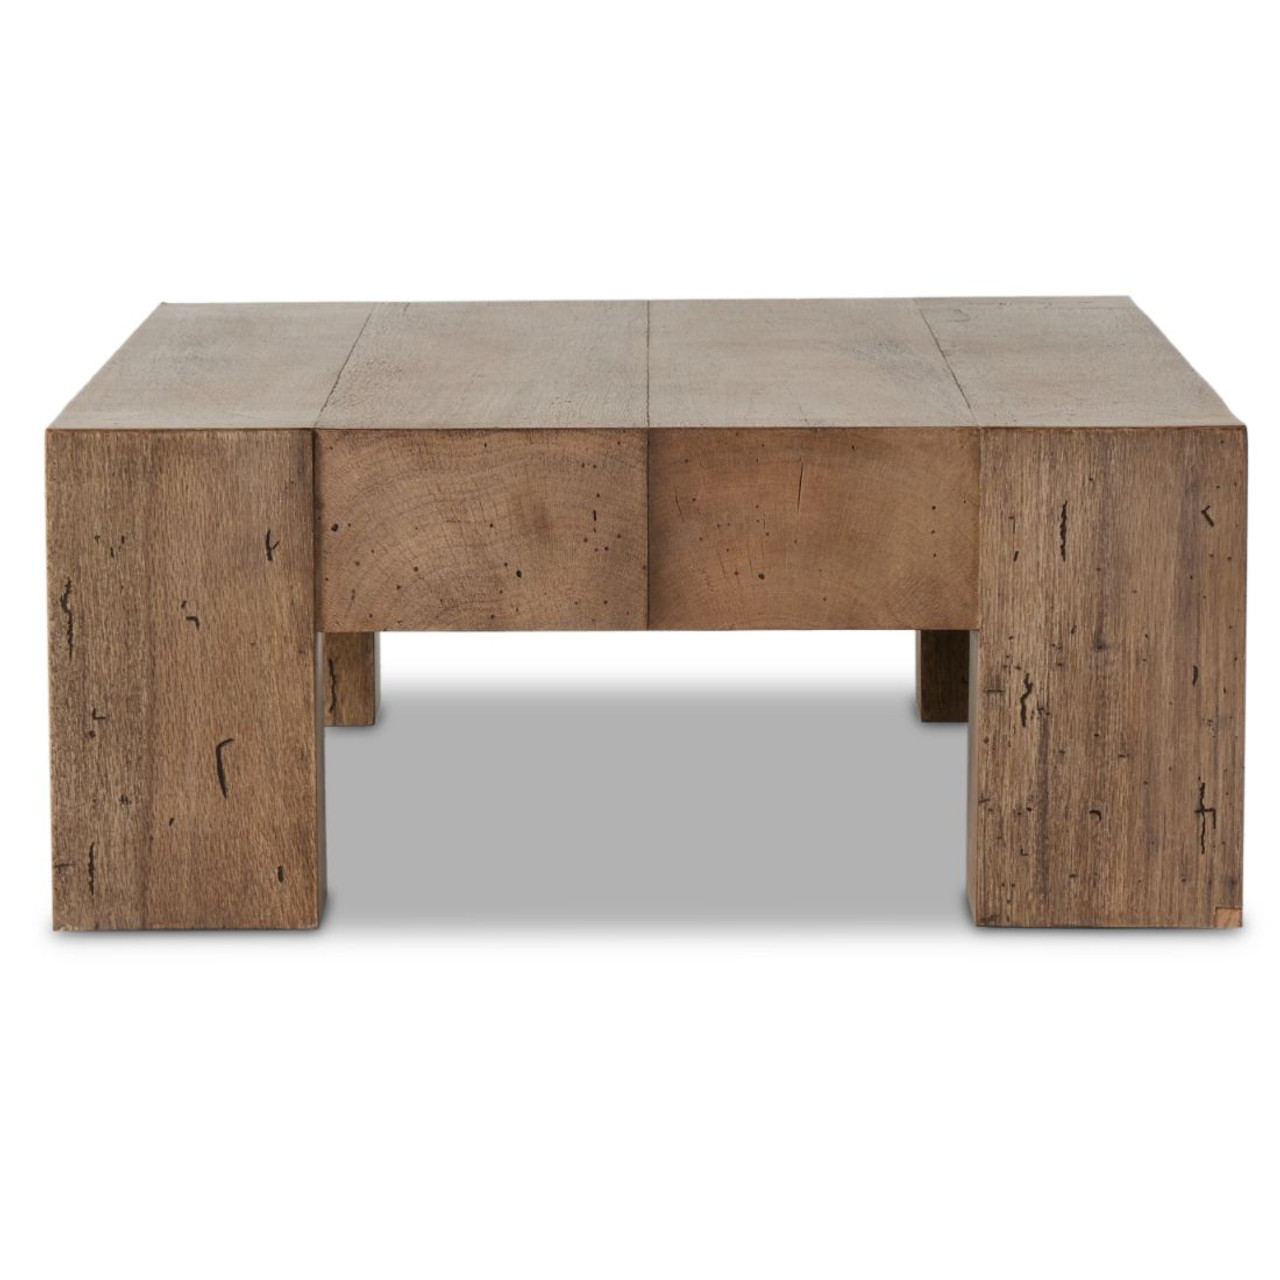 Rectangular Small Table Made of Wood Emone